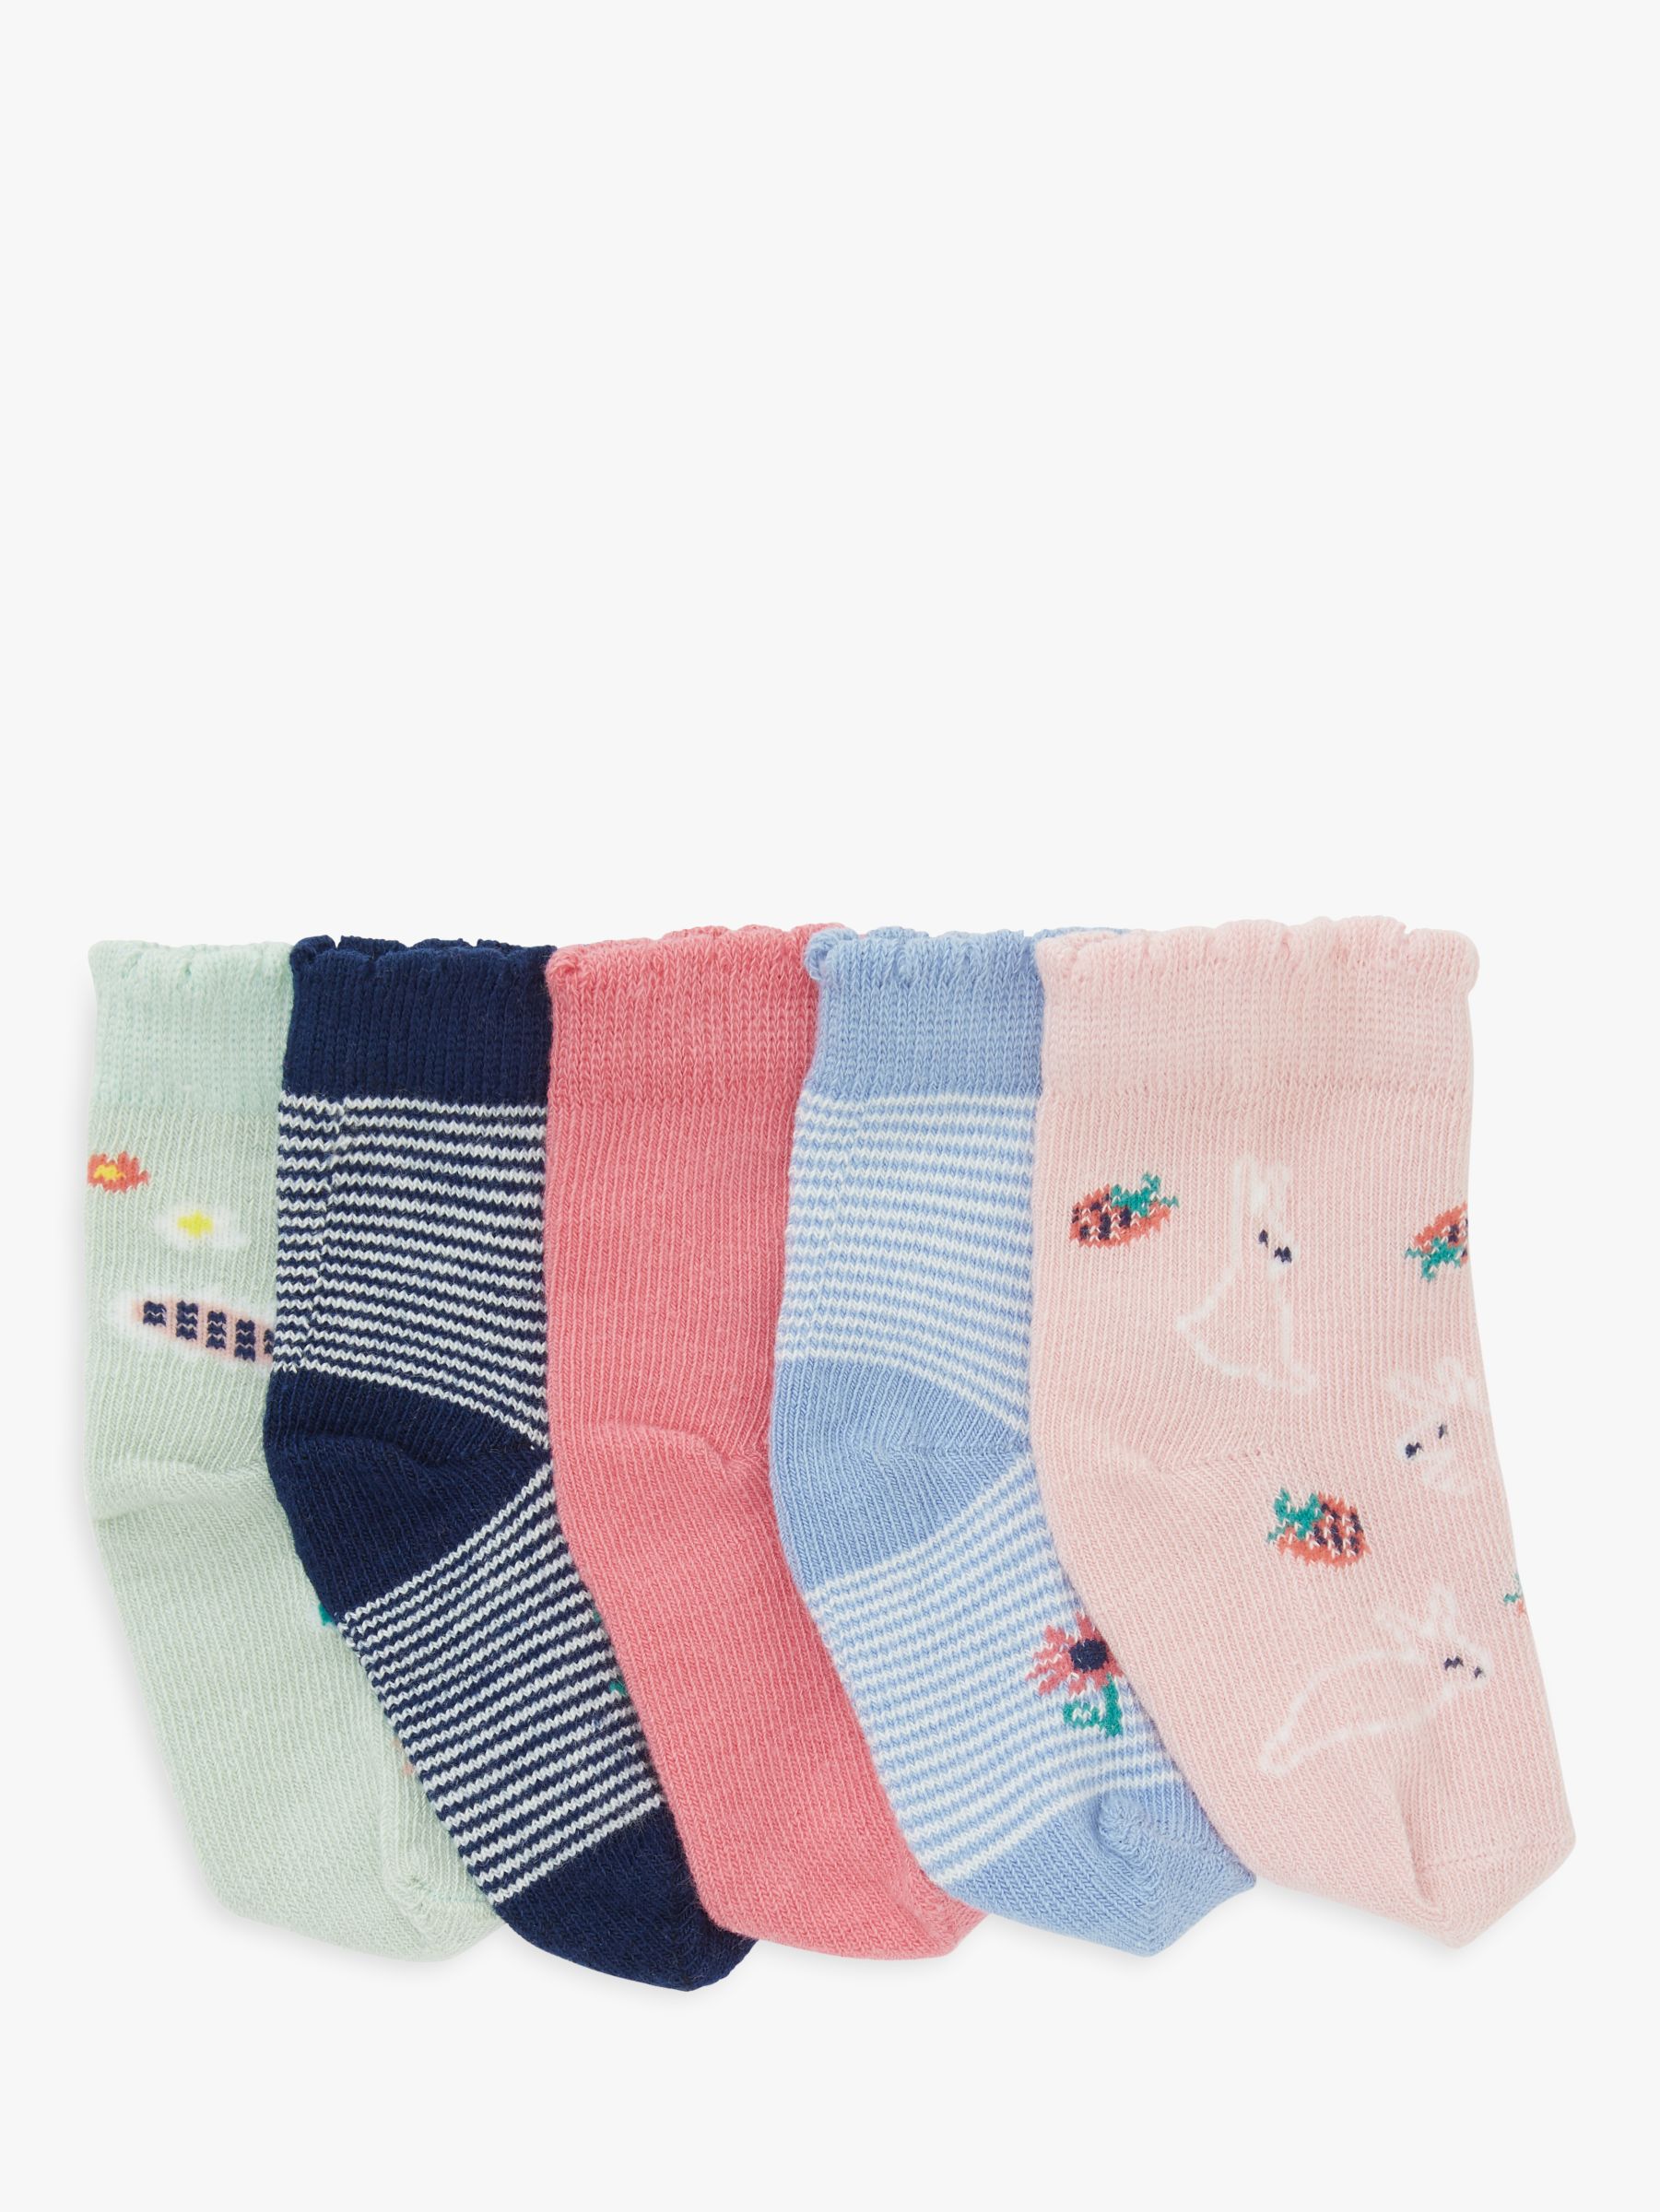 John Lewis & Partners Baby Cotton Rich Bunny Socks, Pack of 5, Multi, 6-12 months